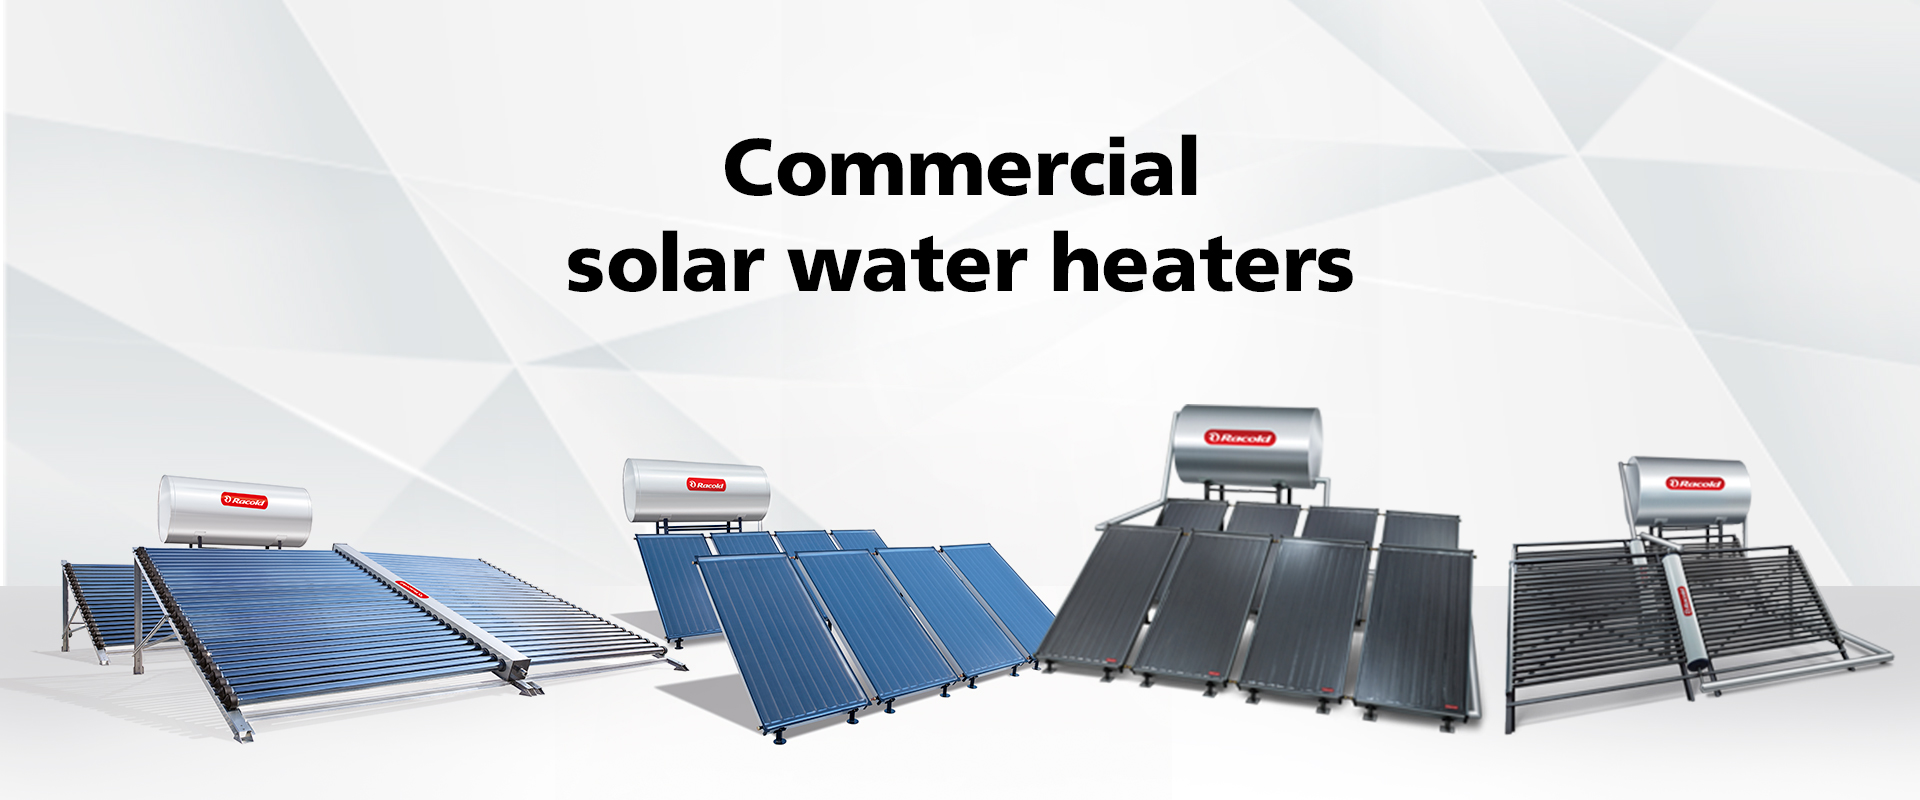 Applications of a Commercial Solar Water Heater